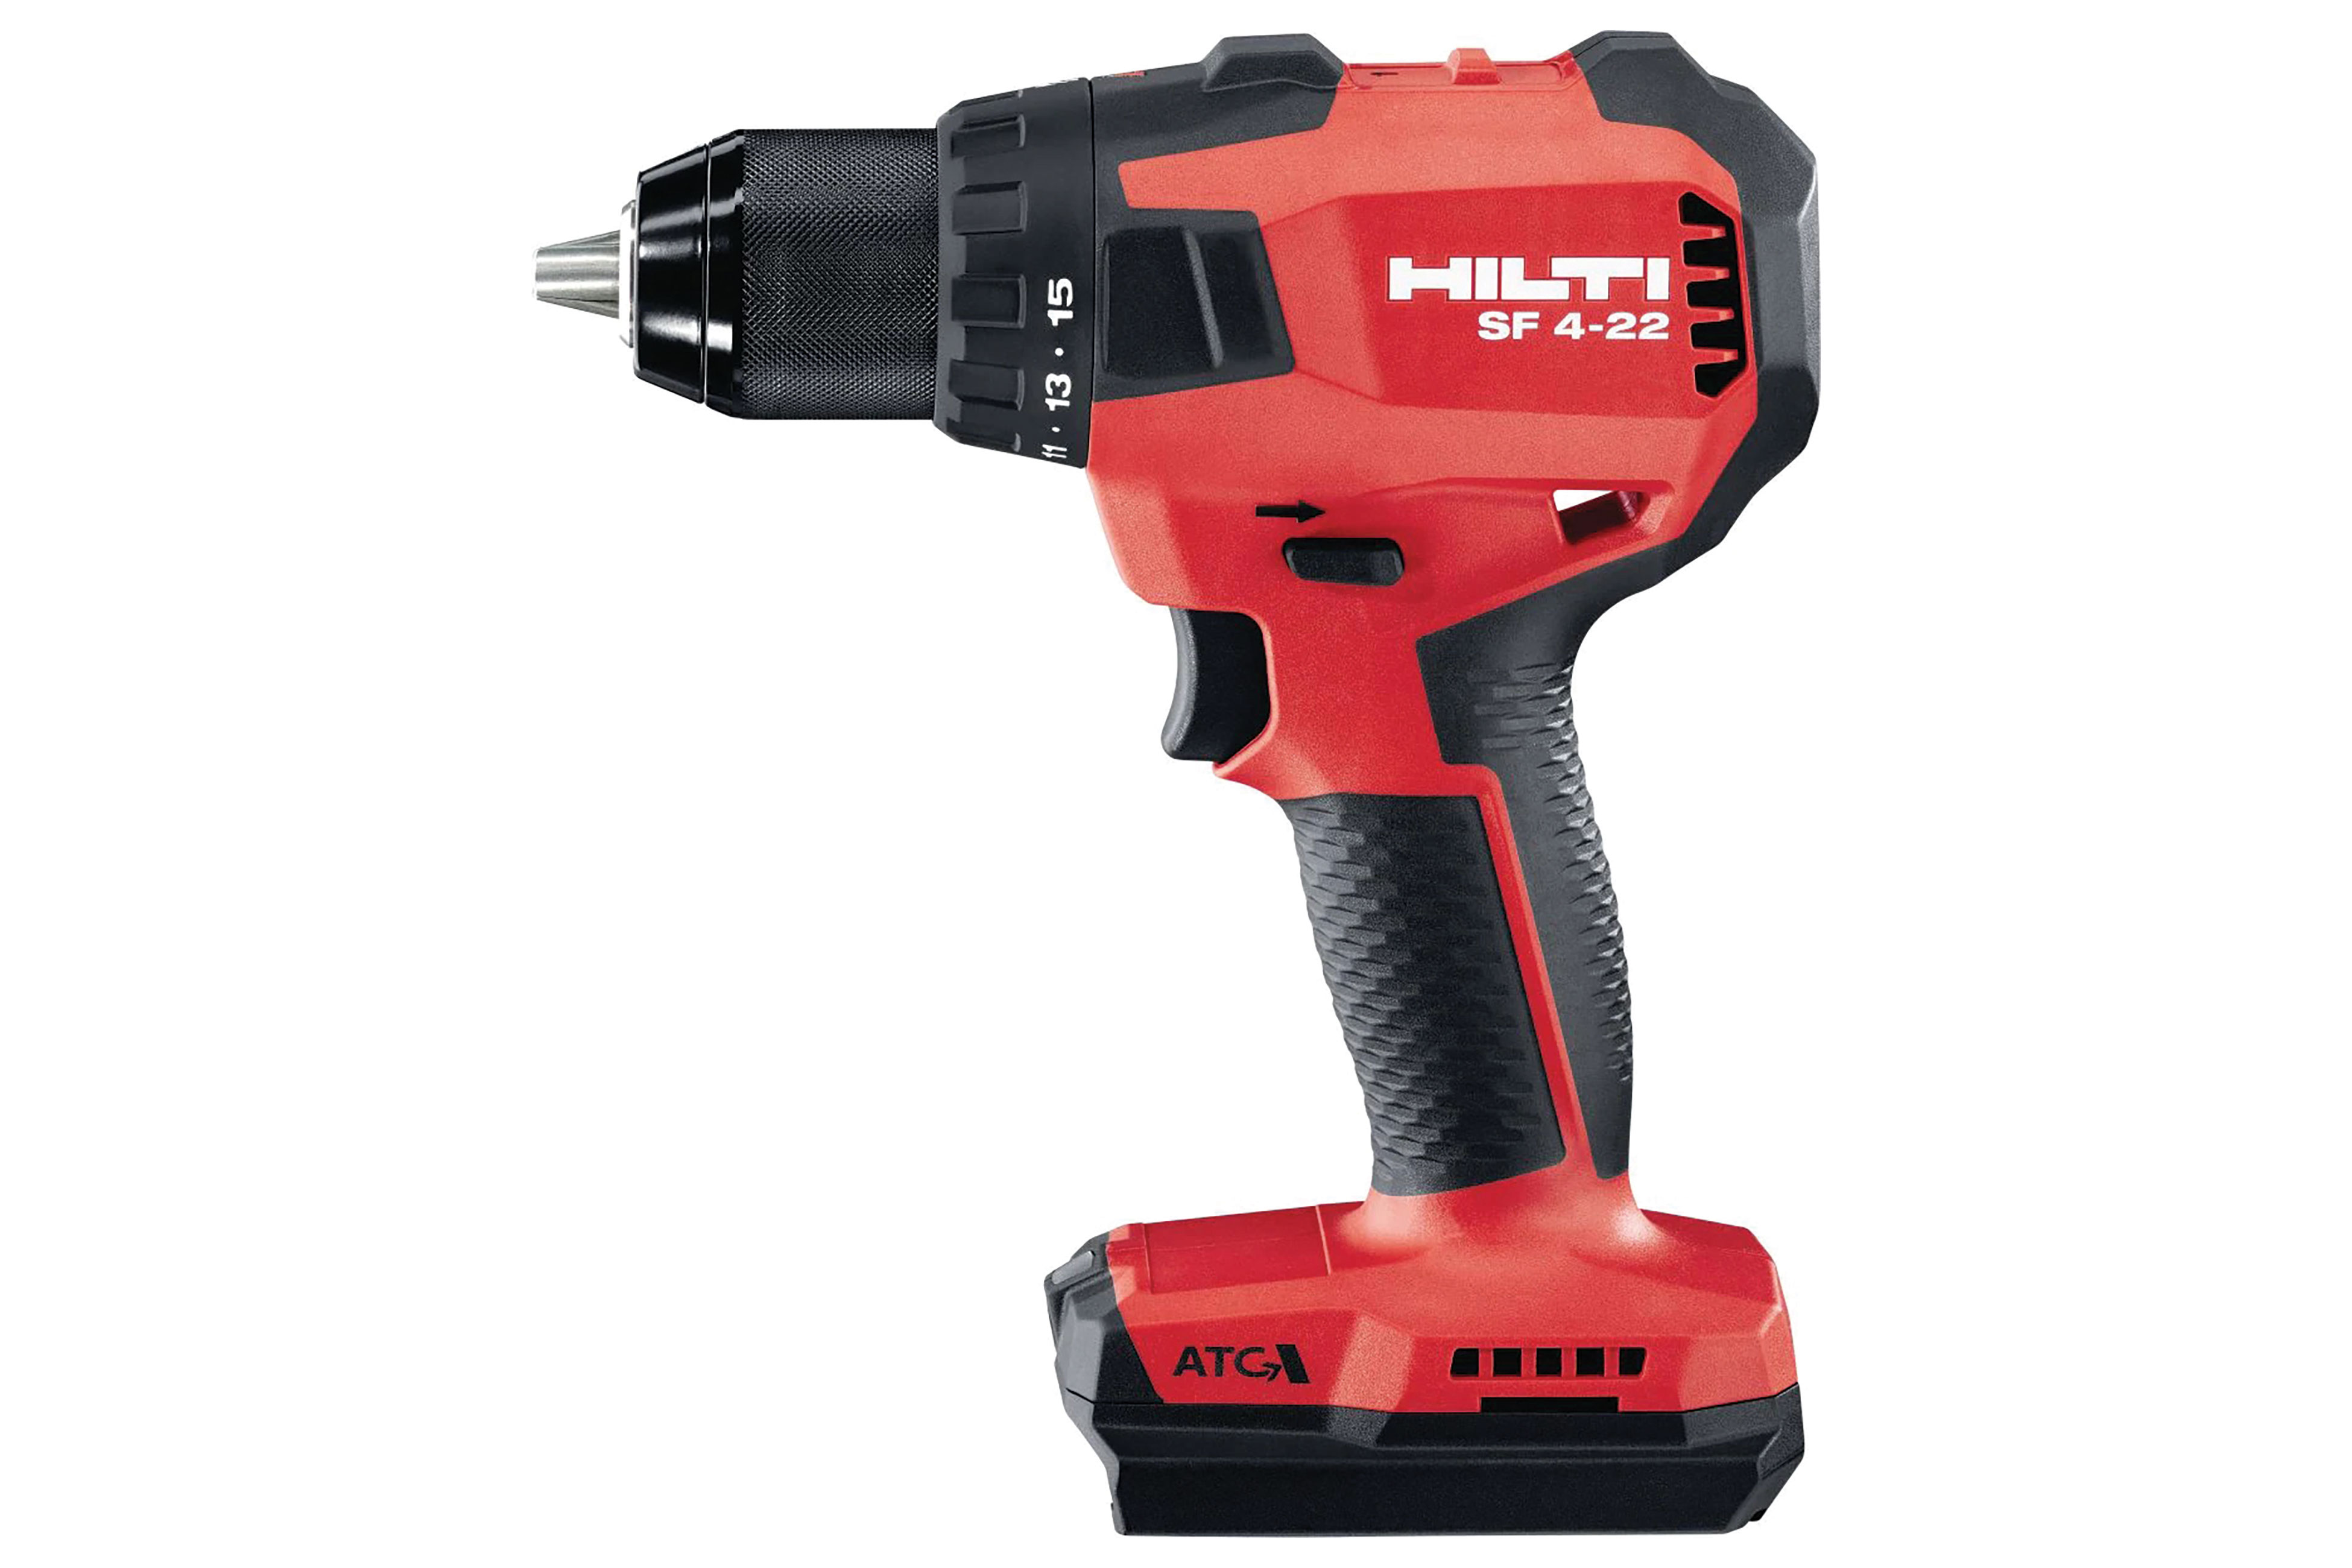 Black and red cordless drill-driver with Hilti logo. Image by Hilti.